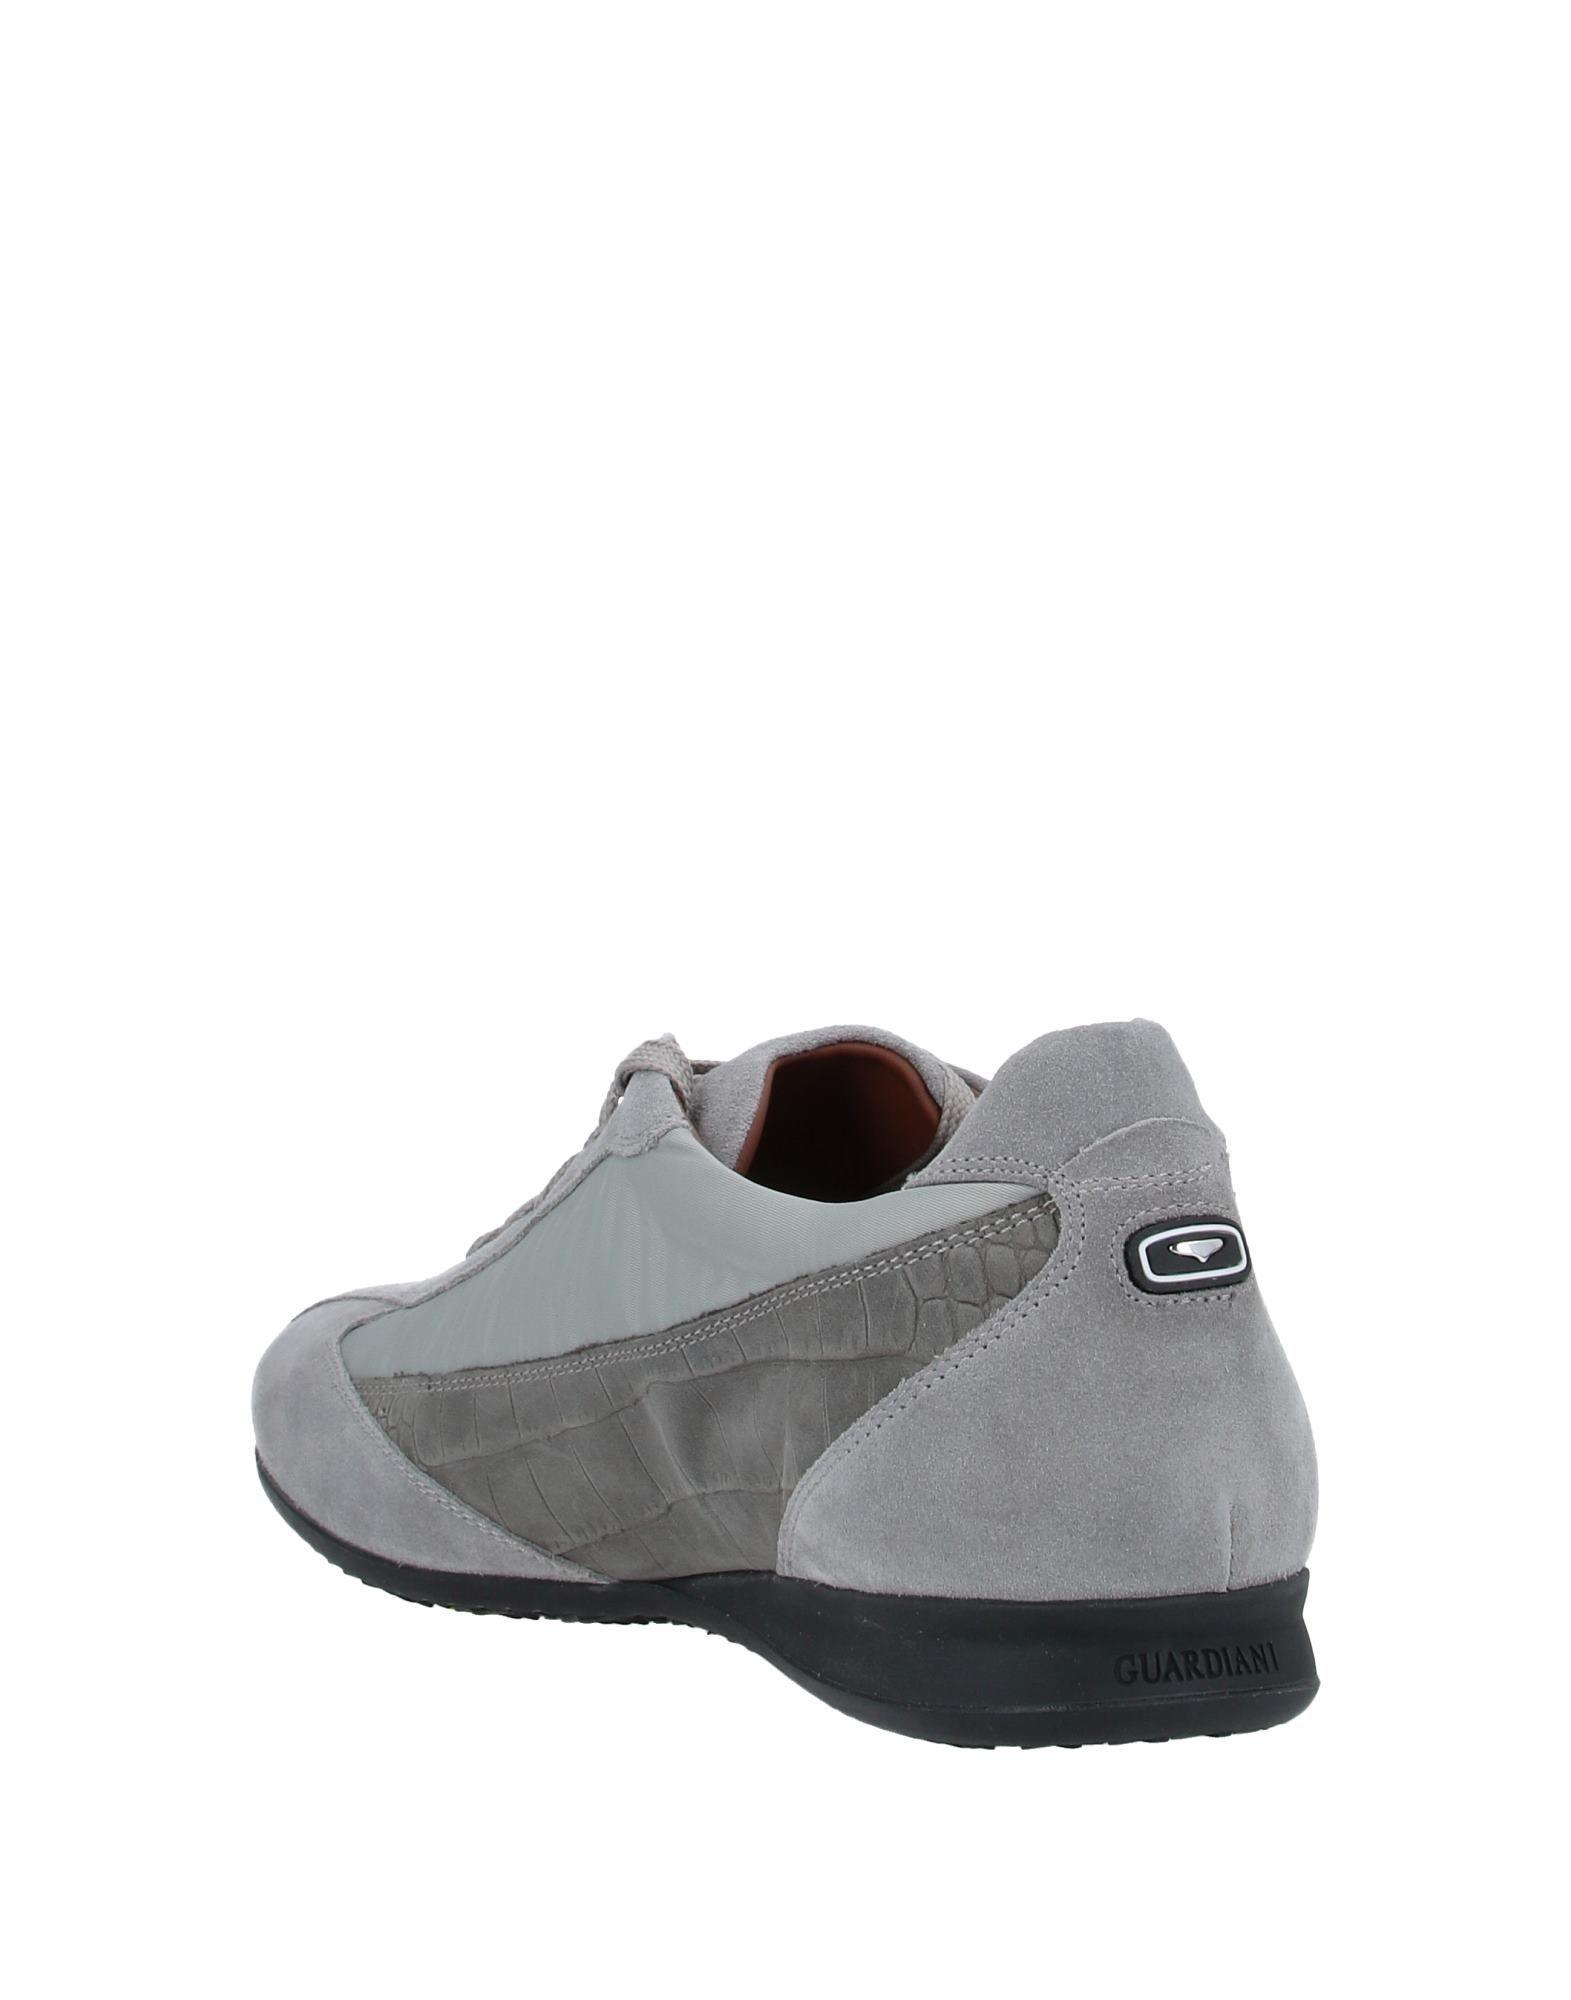 Alberto Guardiani Leather Trainers in Grey (Gray) for Men - Lyst